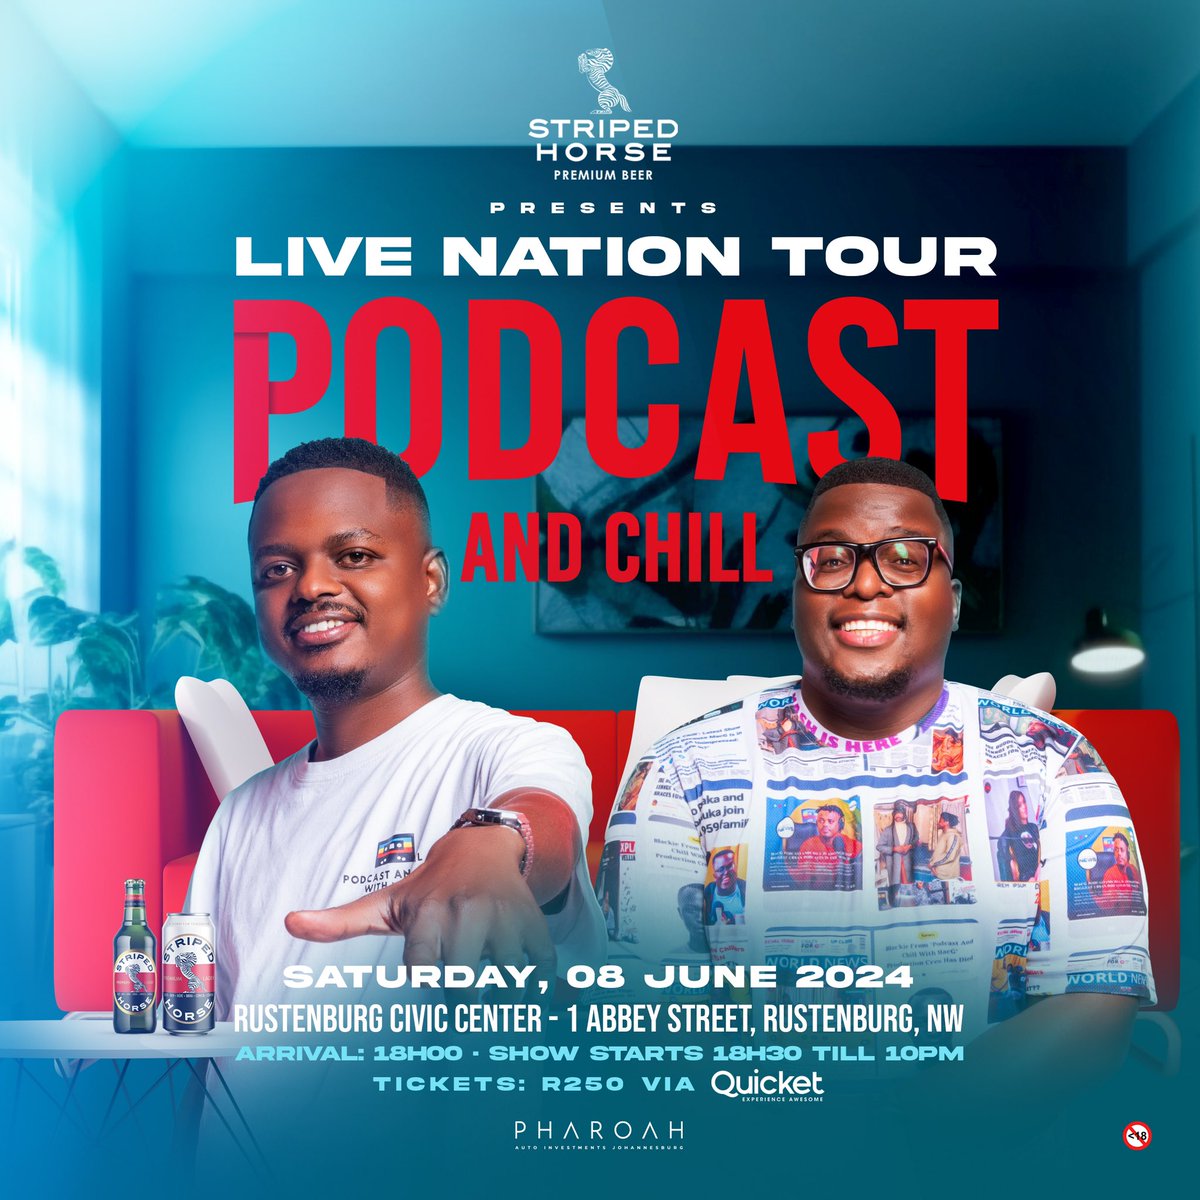 Batho Ba ko North West ‼️ Your moment is FINALLY HERE🚀 Rre tla be rele ko Rustenburg ka di 8 tsa June📍 ko Civic Centre 🔥 and you don’t want to miss the madness Secure your spot today to get the ultimate #podcastandchill National Tour experience ✈️ Tickets are available at